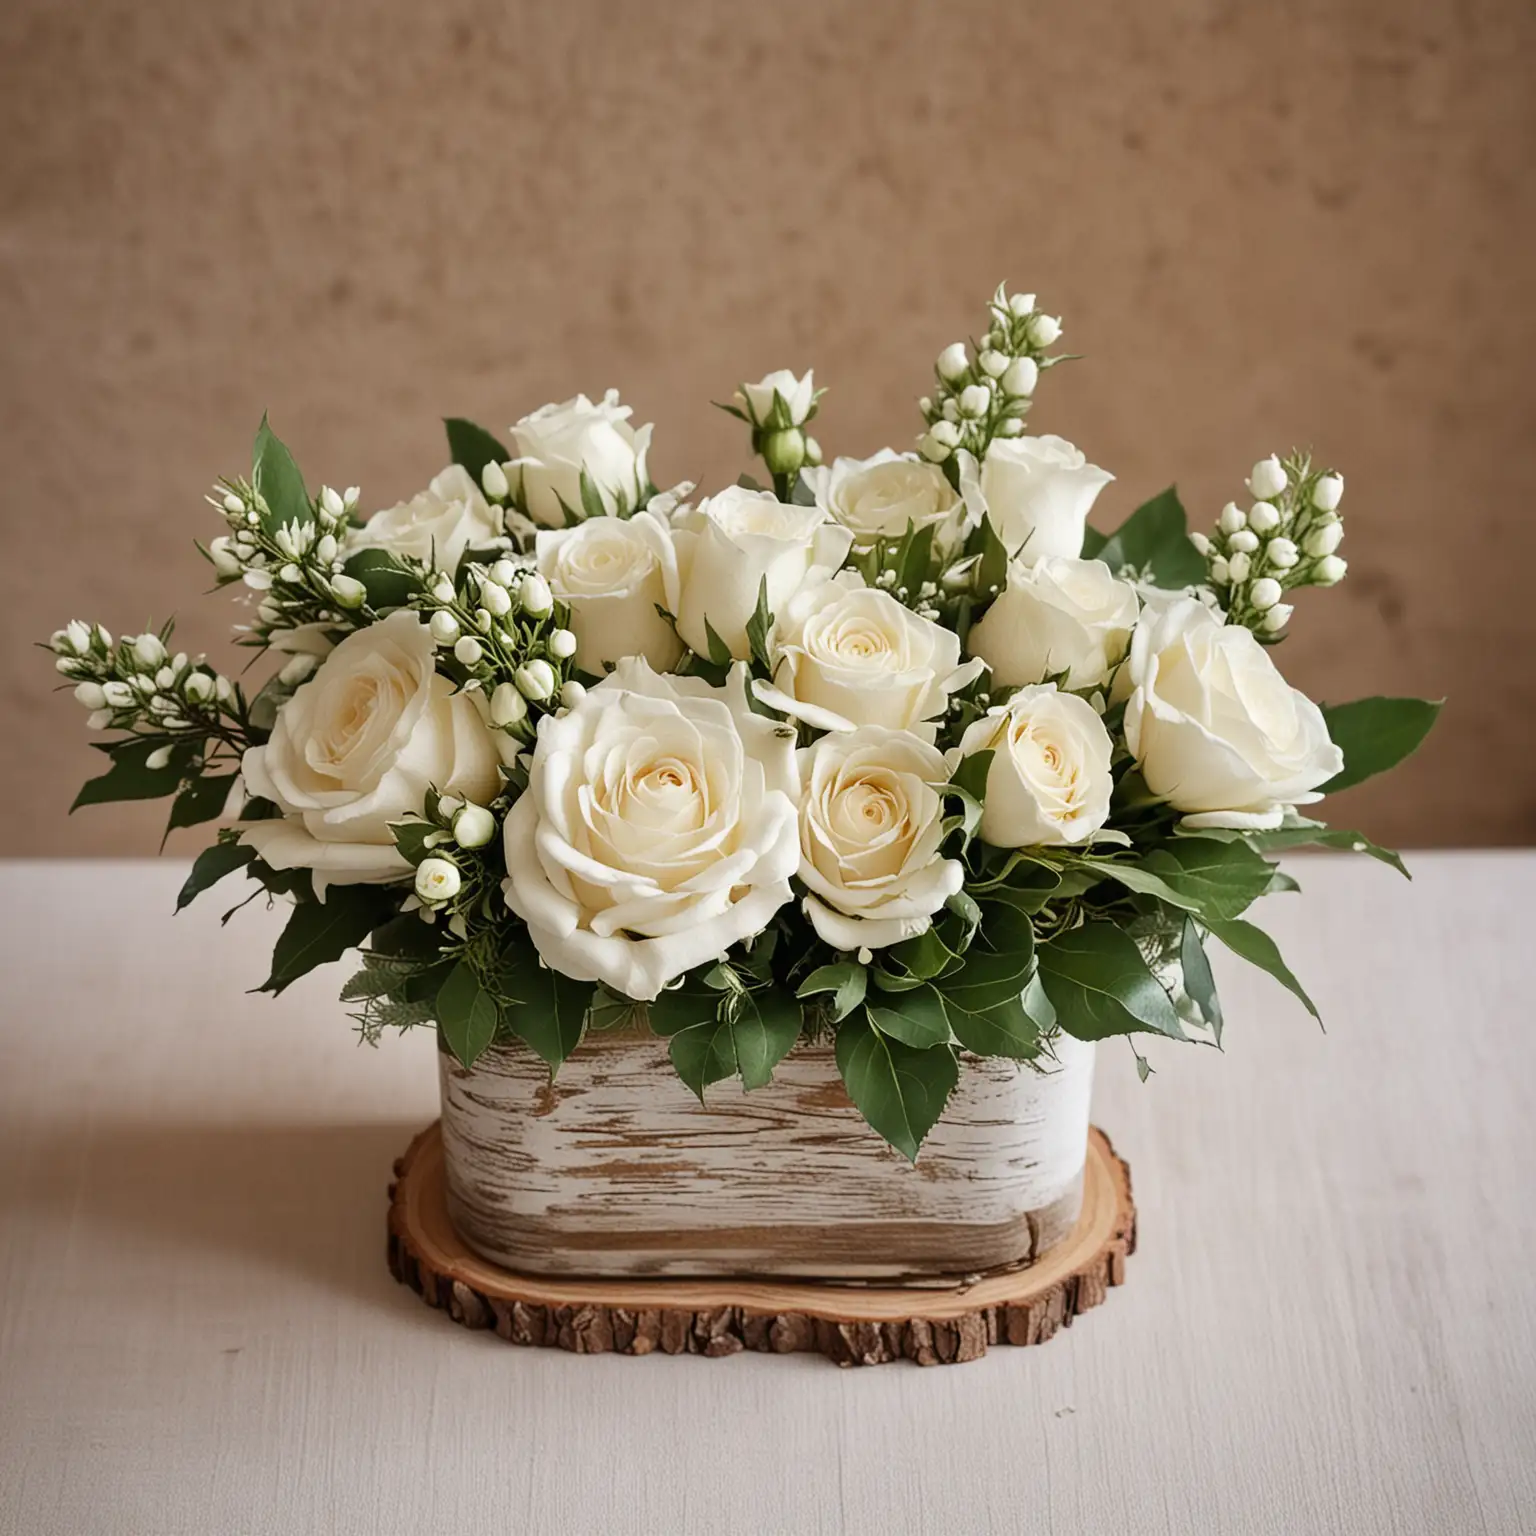 simple and small rustic white winter wedding centerpiece wit blossoms a few white roses; make the background neutral